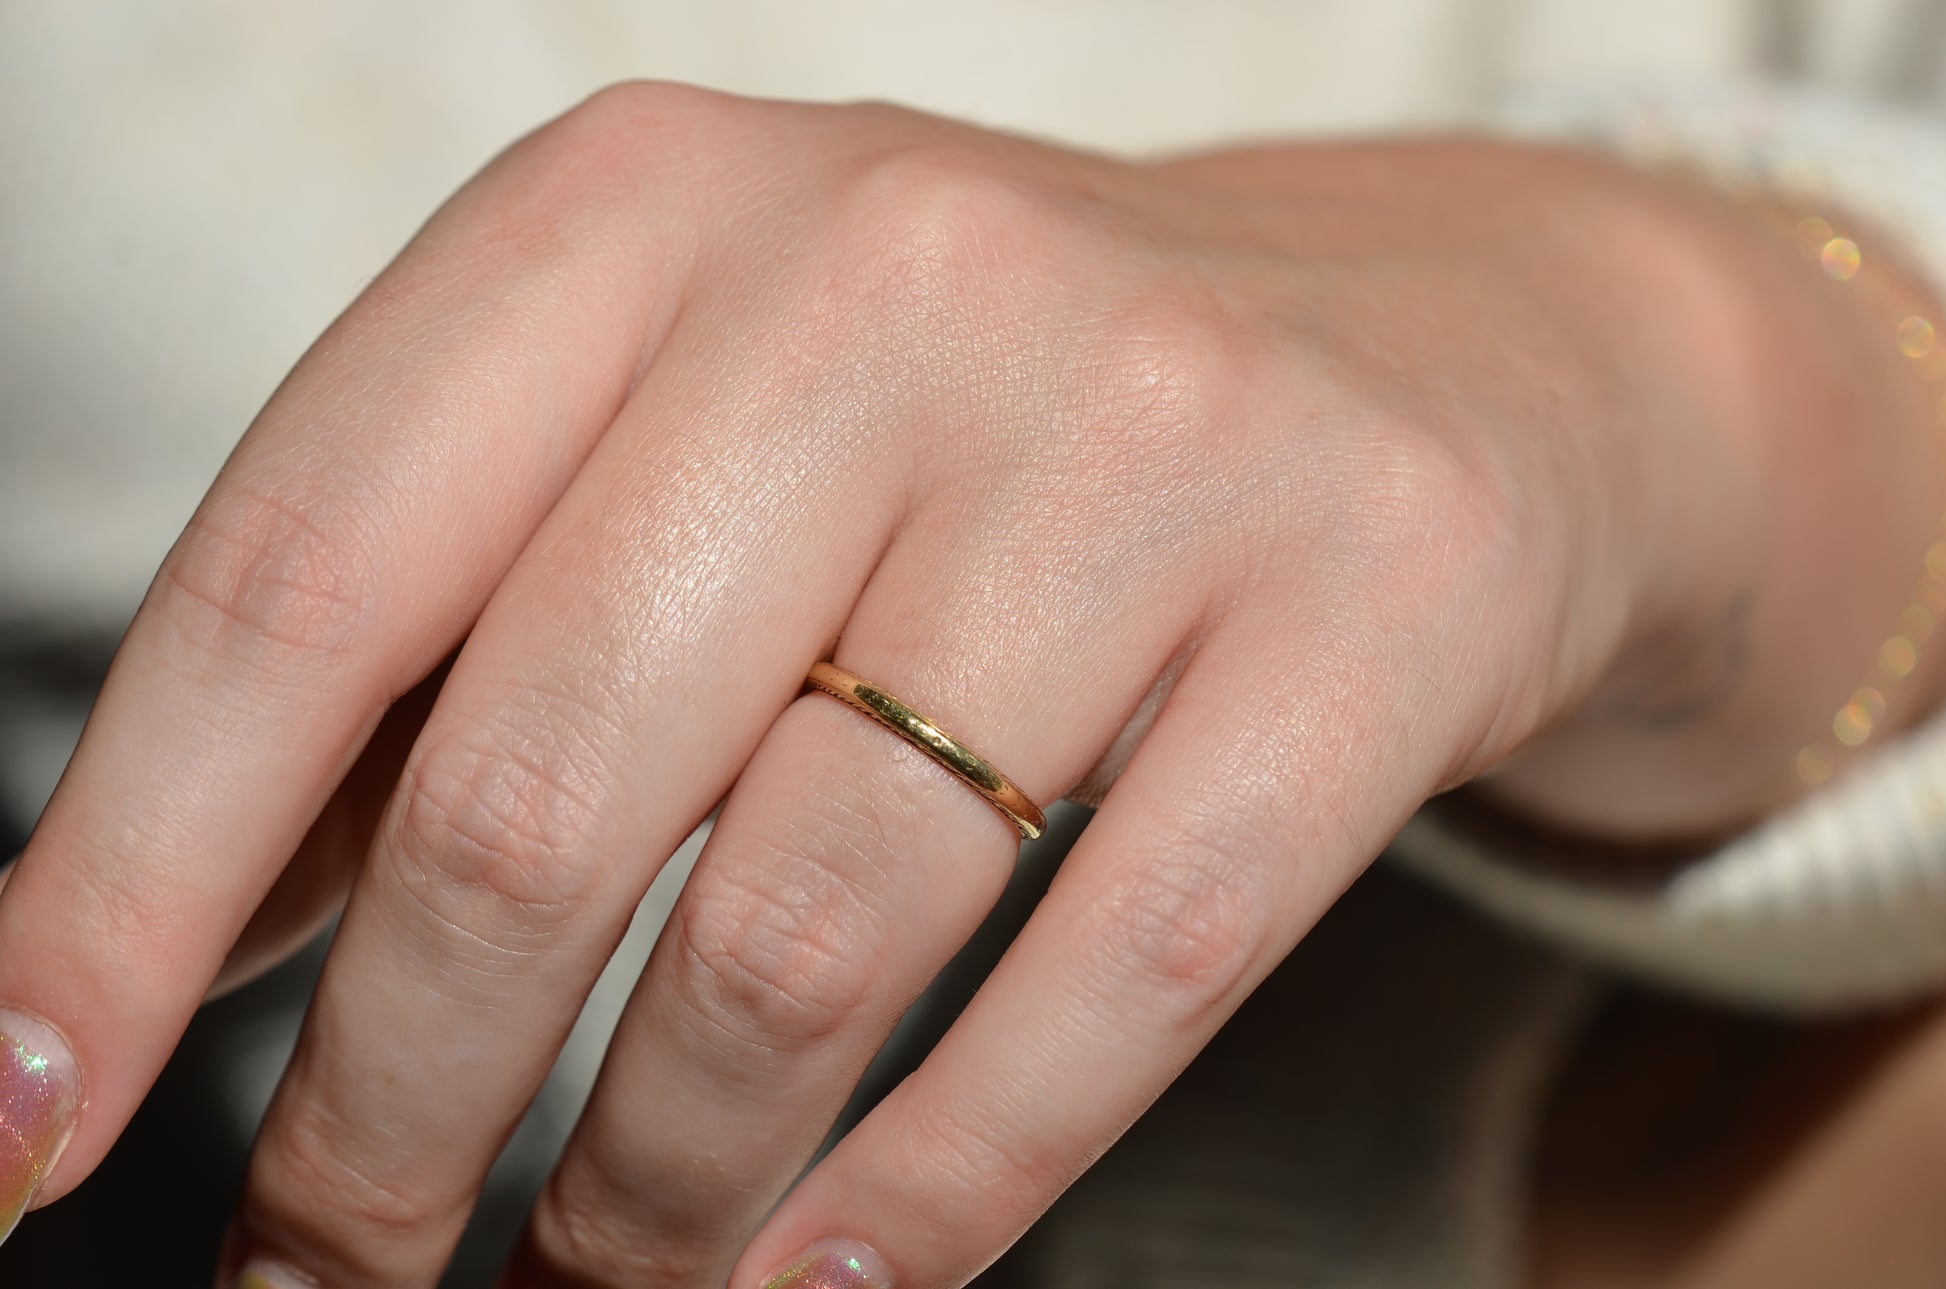 ring shown on the left ring finger of a caucasian model, shown in direct sunlight. image shows full hand and some body in order to help provide a sense of scale of the slim ring on the hand.